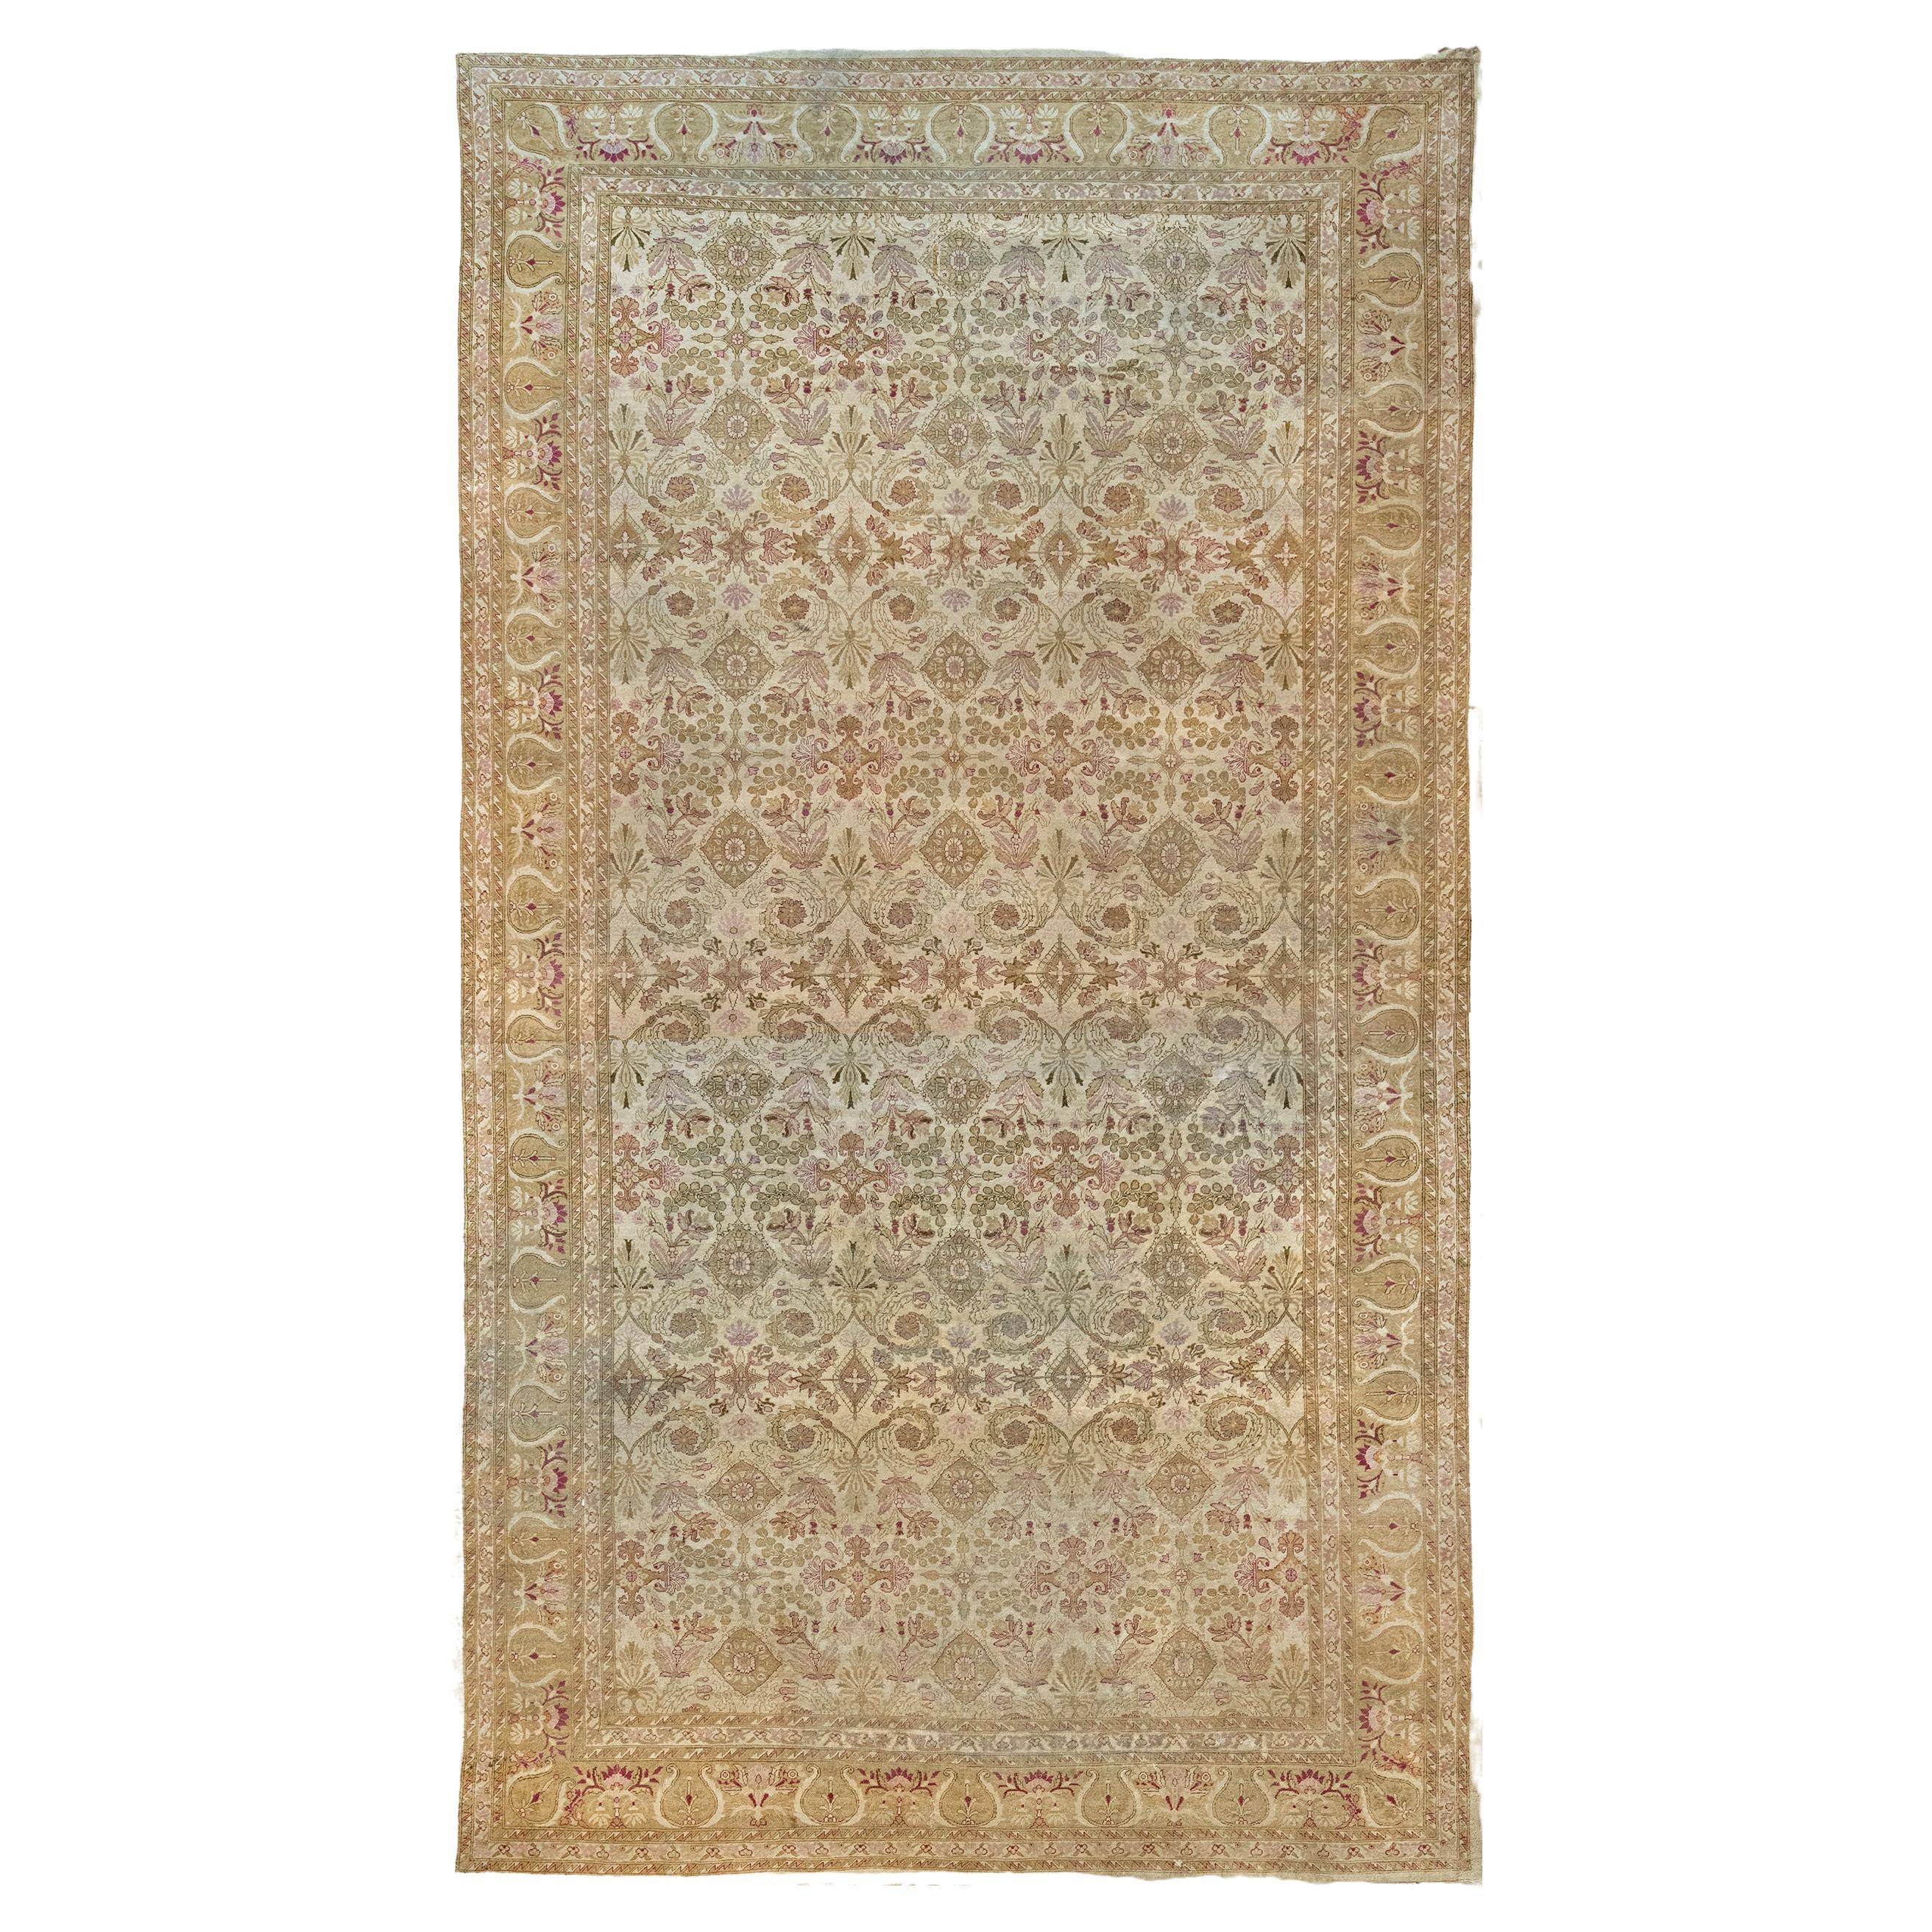 Handwoven Ivory Agra Rug from the Late 19th Century